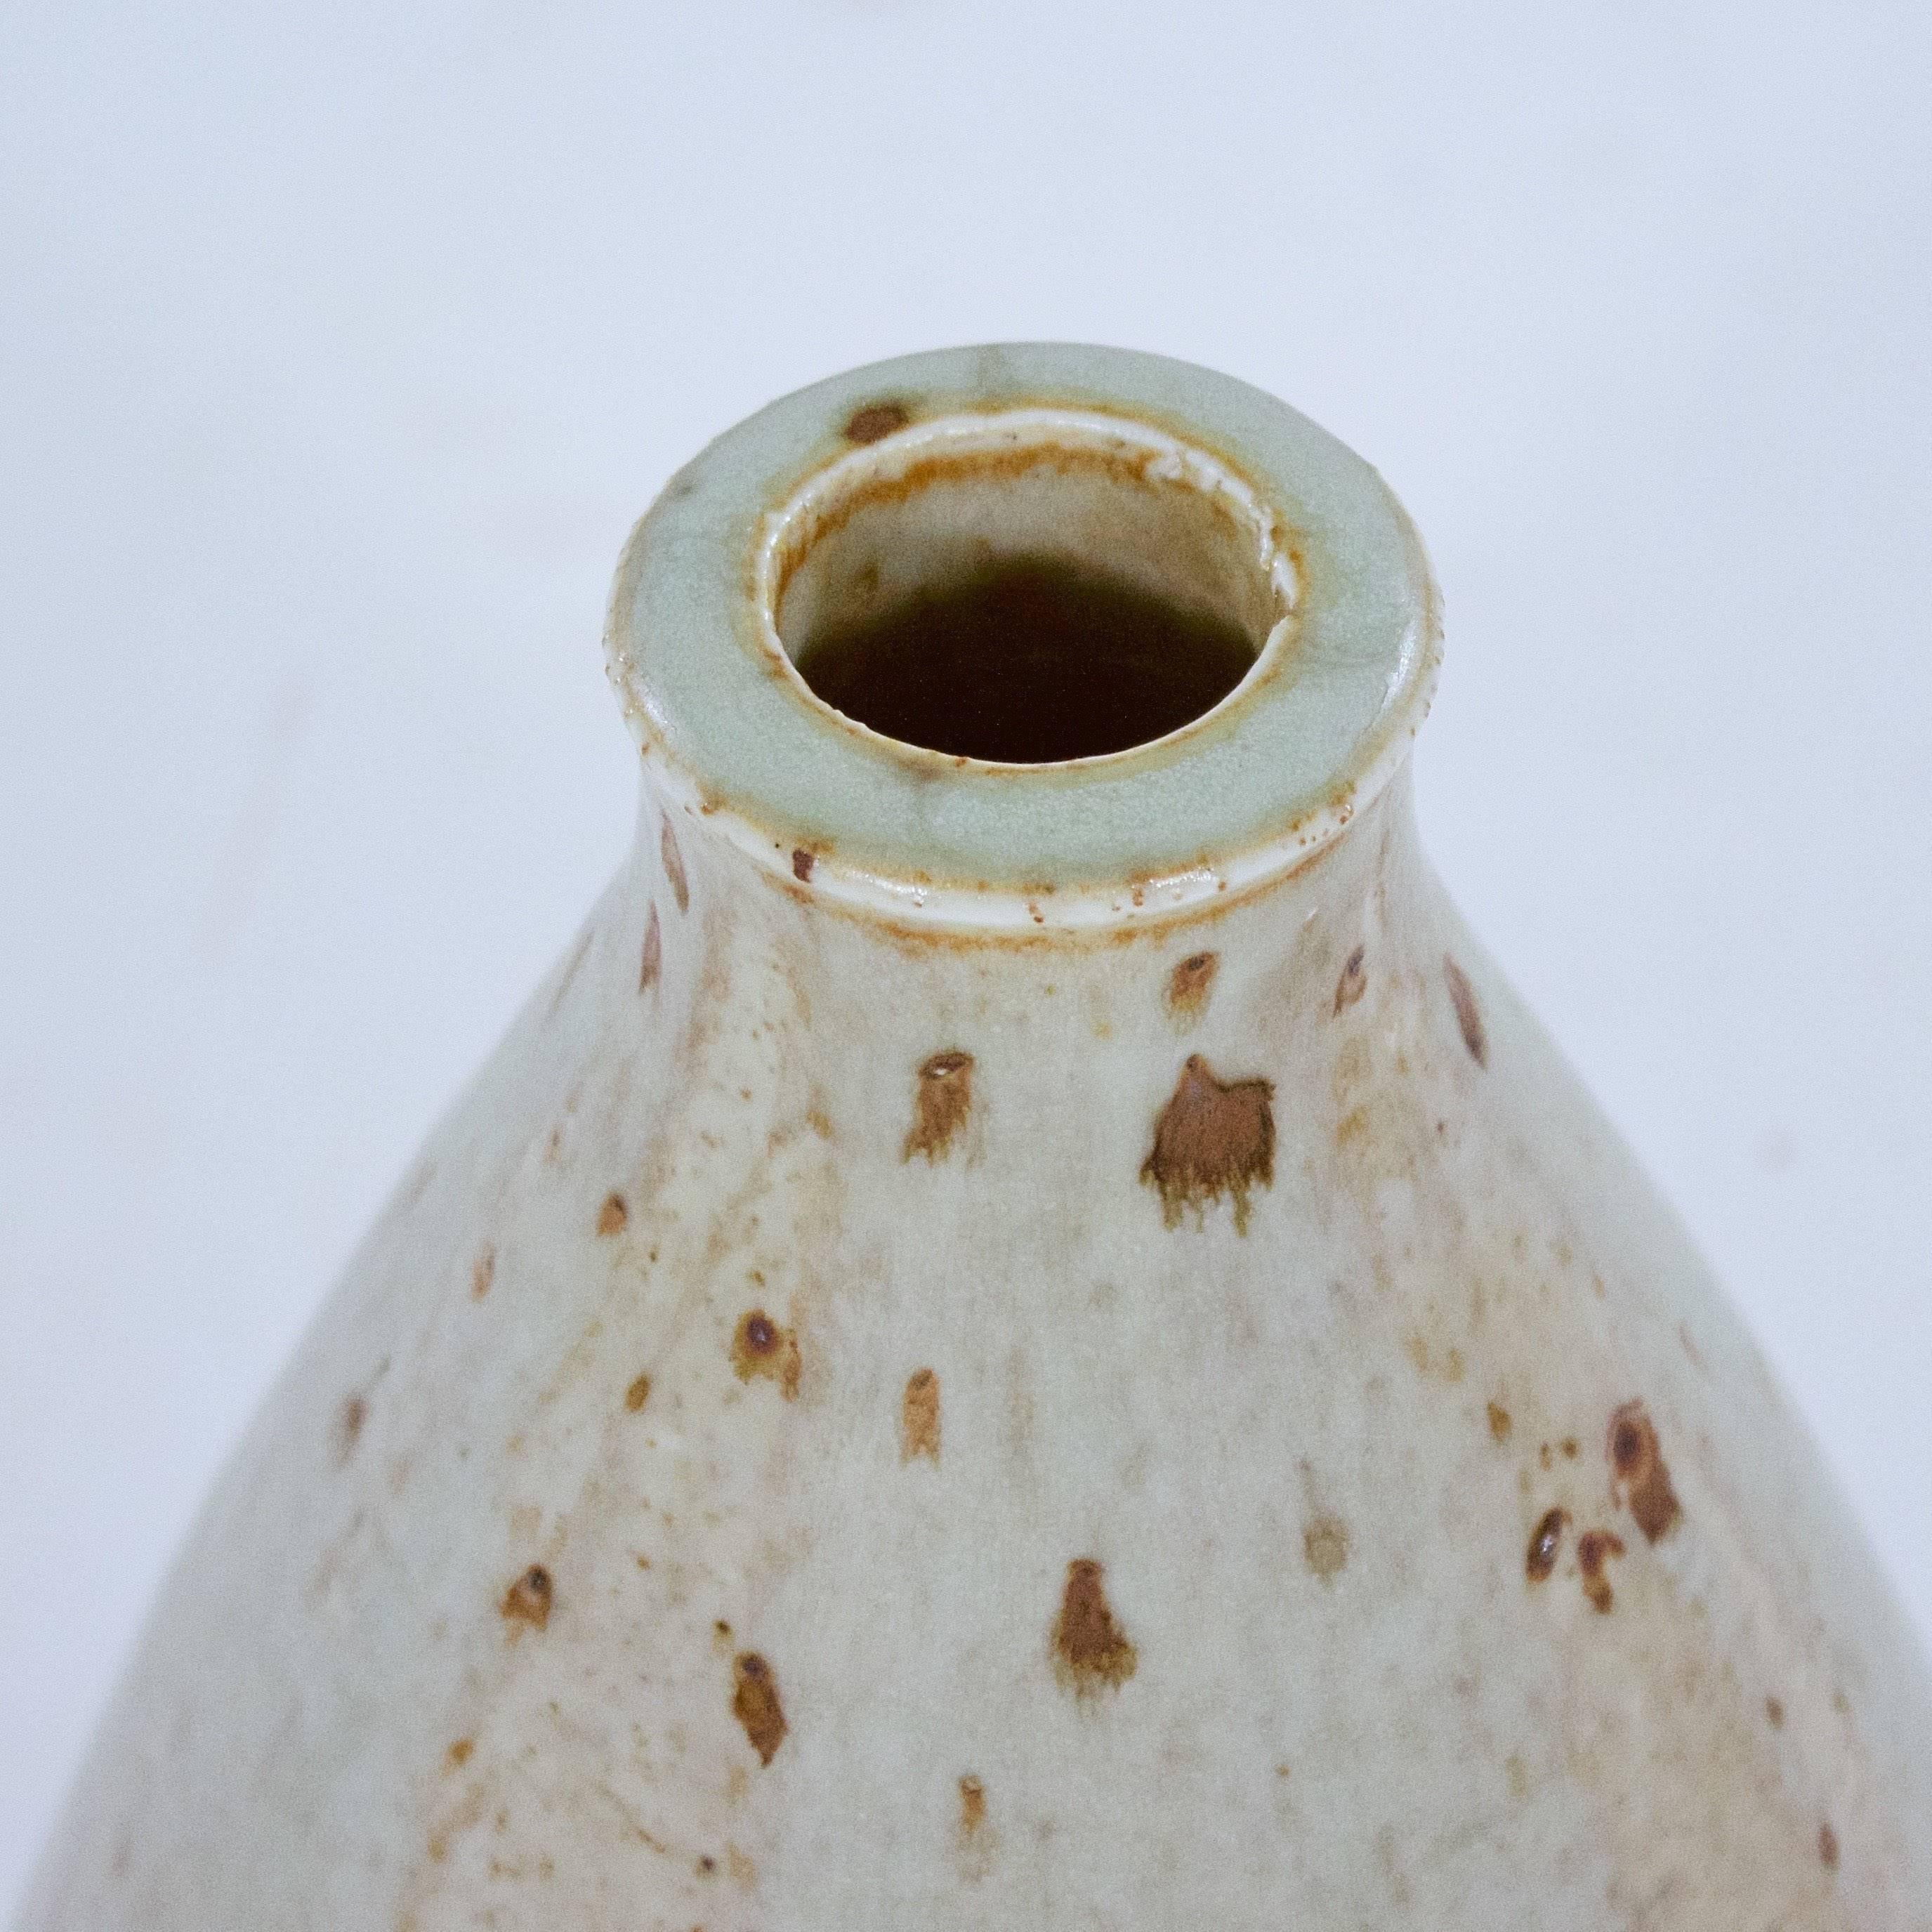 Scandinavian Modern Conical Vase with a Textured Ivory Glaze by Marianne Westman, 1928-2017 For Sale